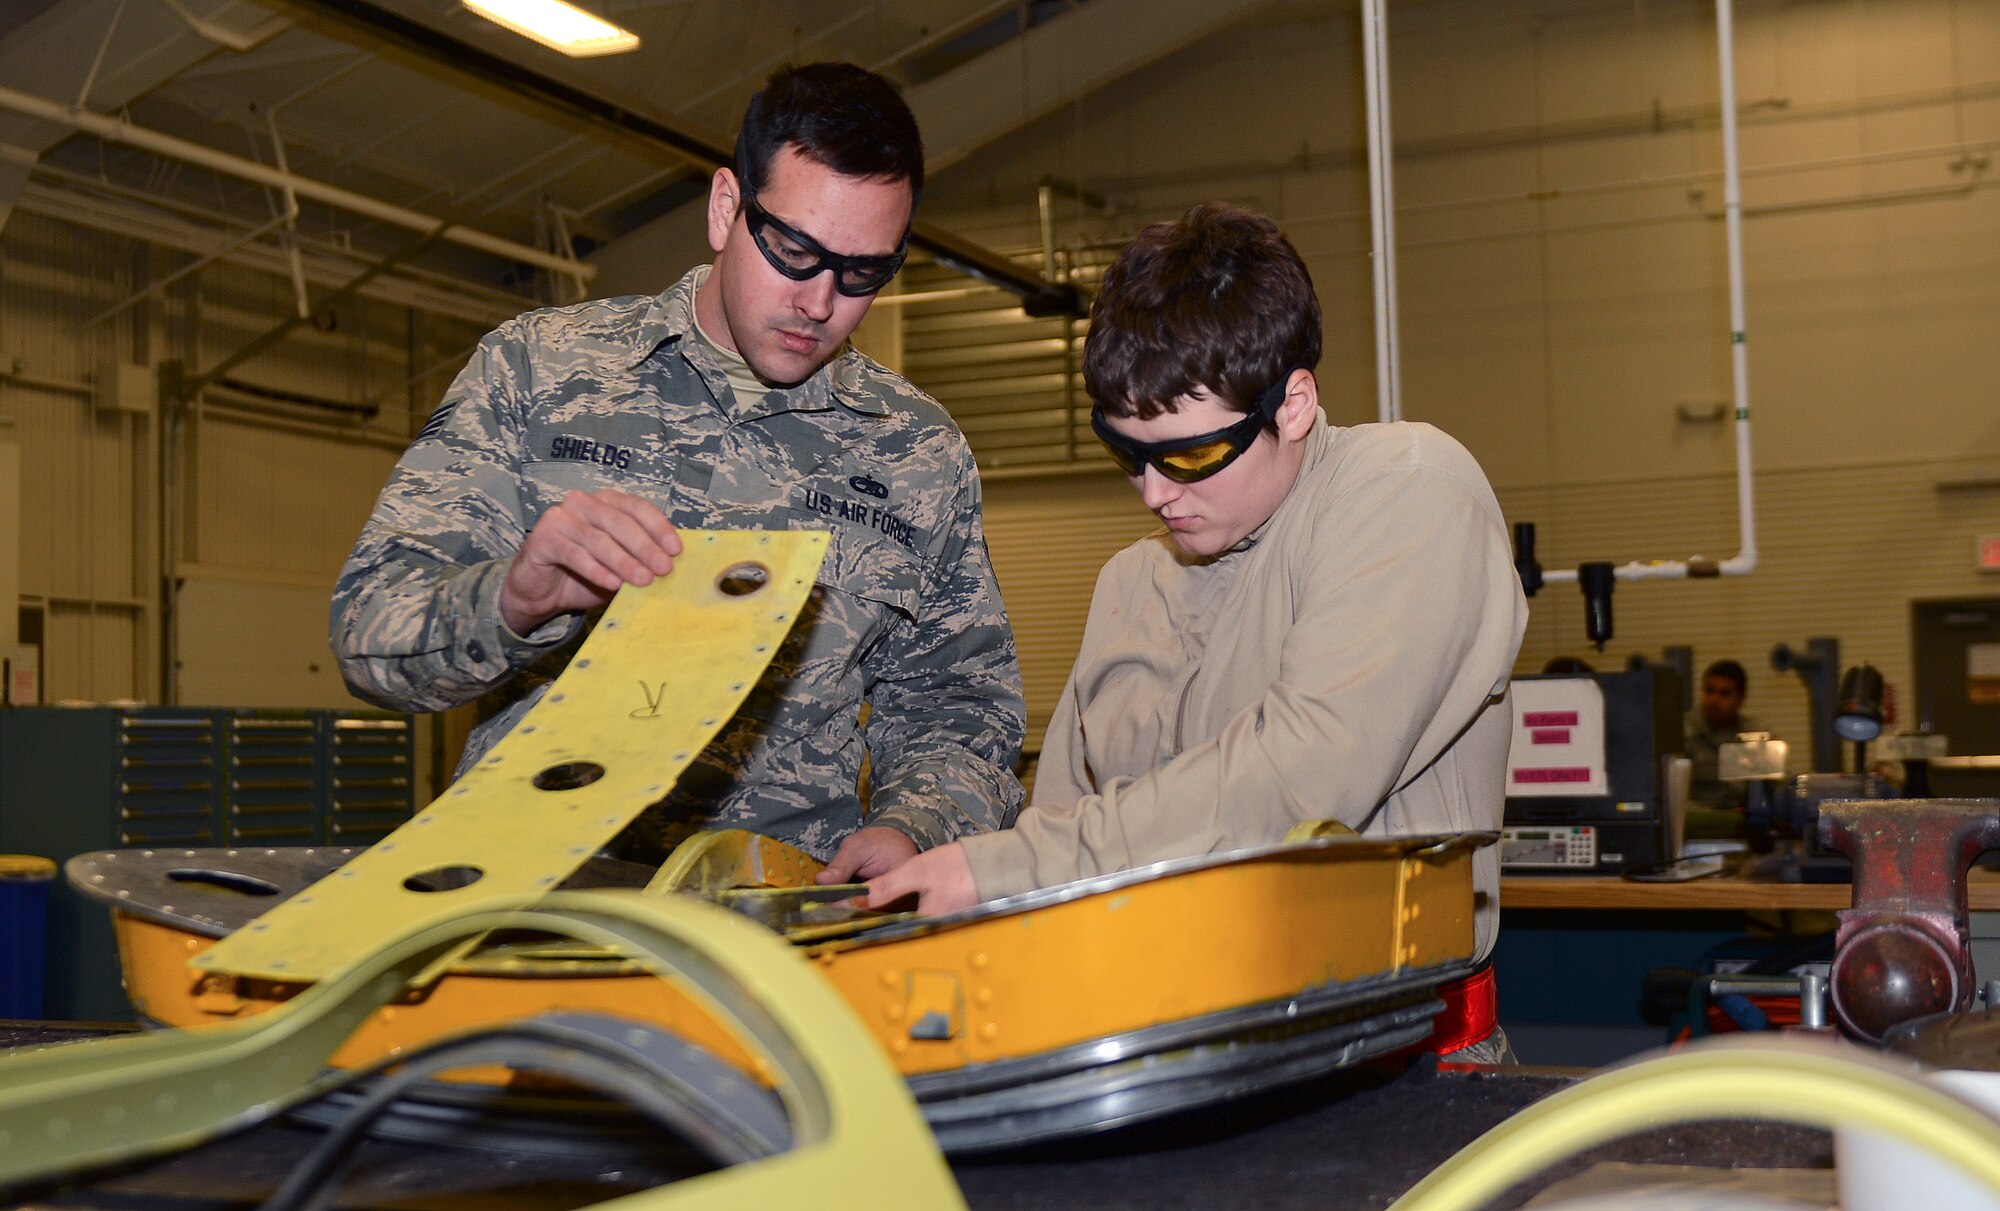 Staff Sgt. Andrew Shields, 22nd Maintenance Squadron aircraft structural maintenance craftsman and Airman 1st Class Shawnna Rawlands, 22nd MXS aircraft structural maintenance apprentice, inspect a KC-135R Stratotanker lower nose access door Dec. 4, 2014. After receiving maintenance each part must go through a final inspection before being sent to the corrosion shop to be primed. (U.S. Air Force photo/Senior Airman Colby L. Hardin)